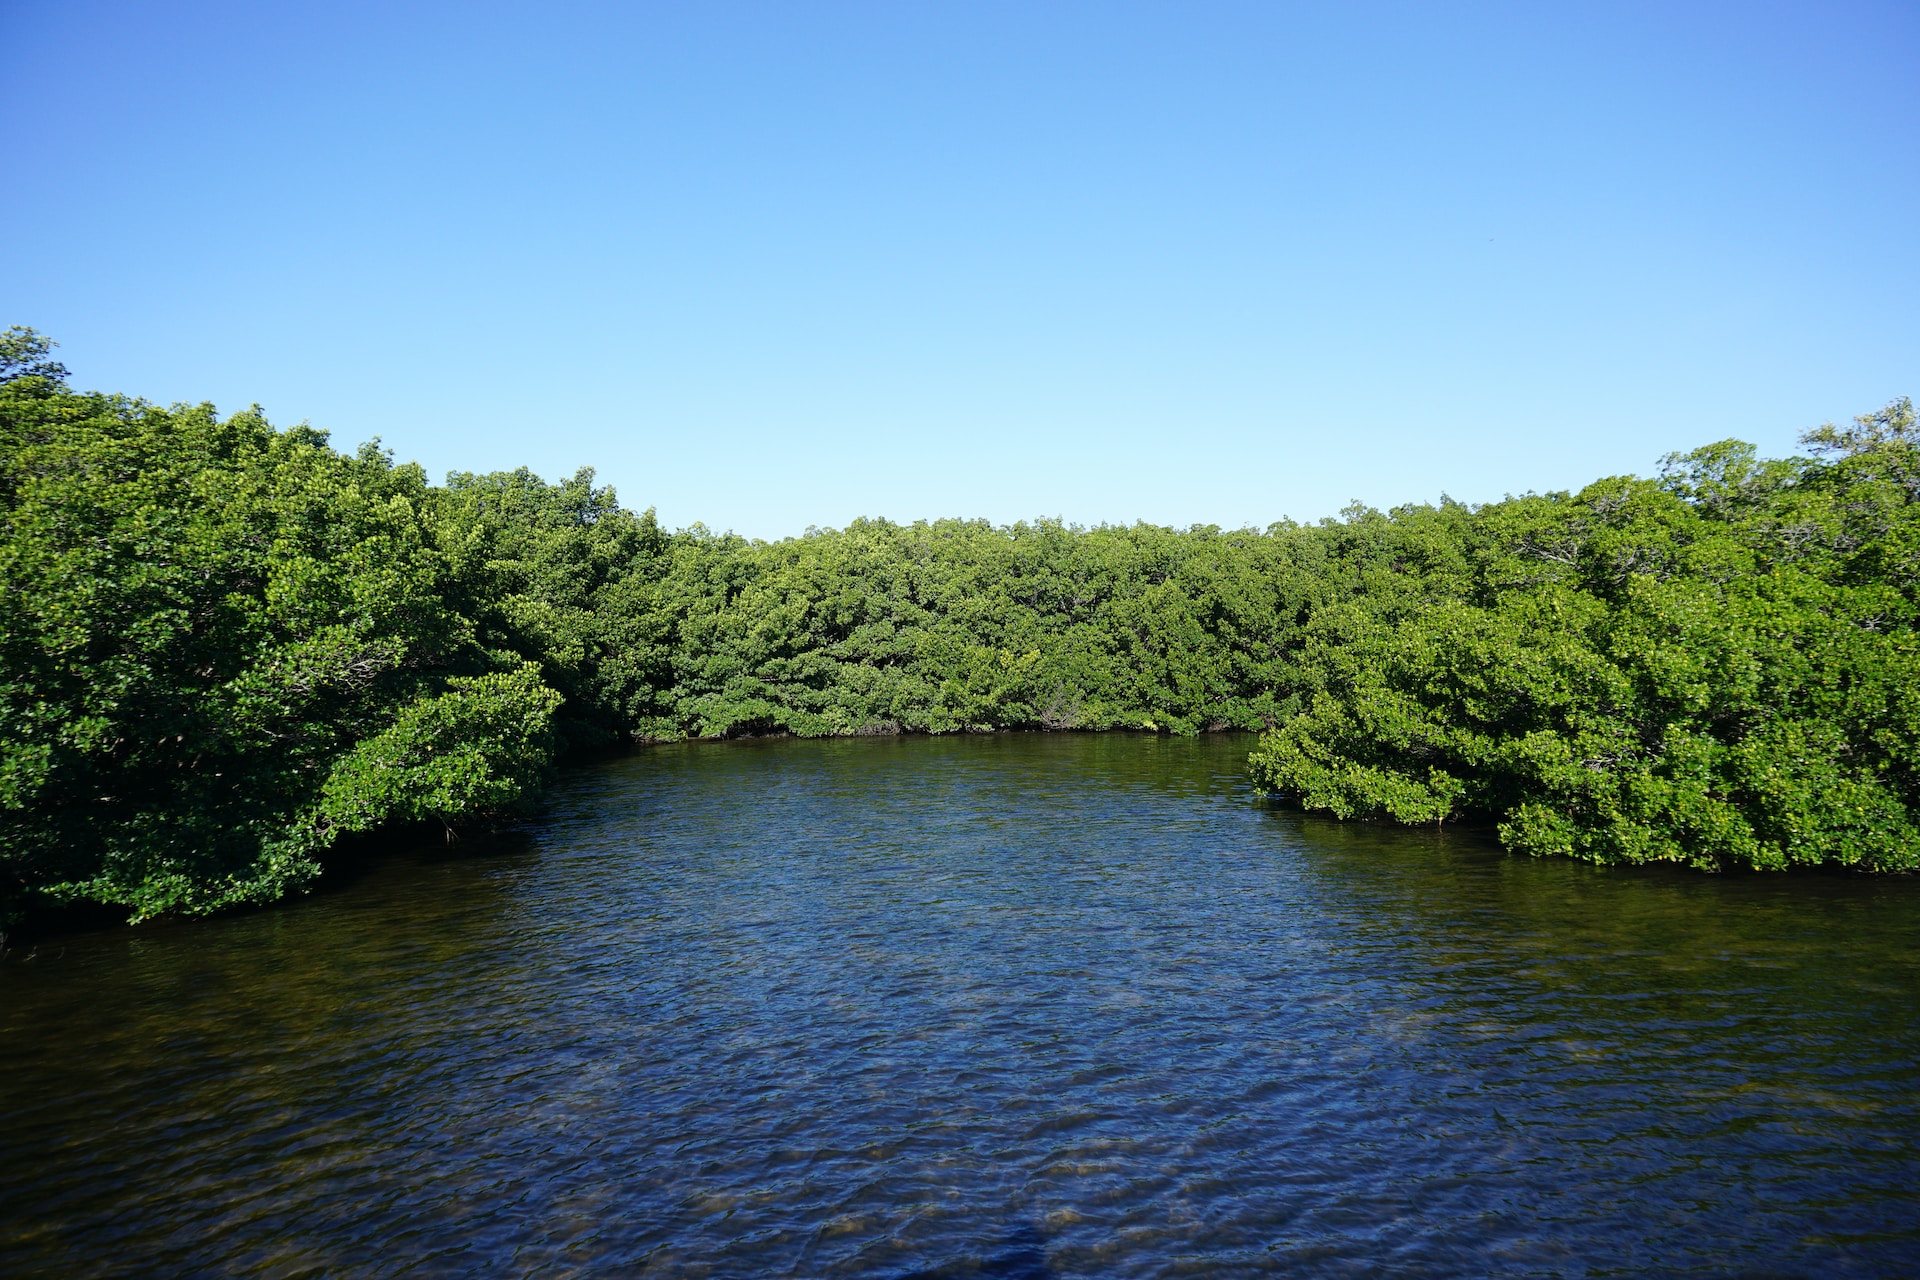 Top 10 Most Fascinating Facts About Mangroves You Need to Know